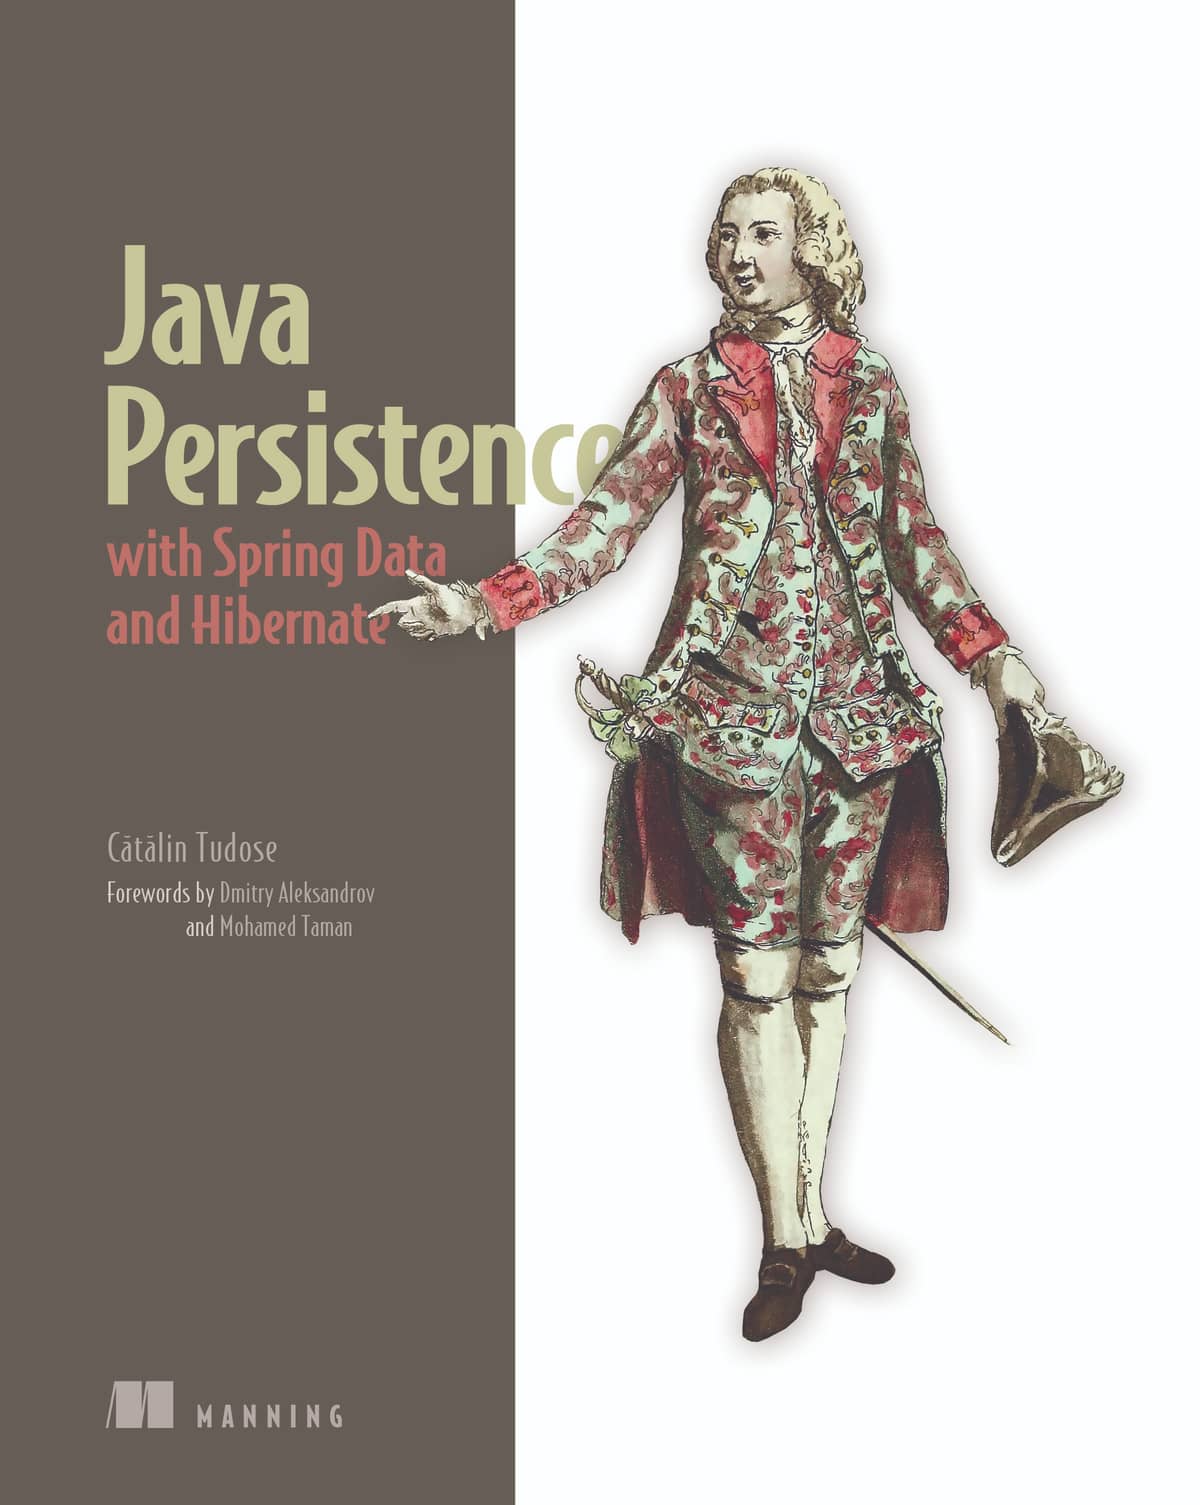 Java Persistence with Spring Data and Hibernate (Manning)